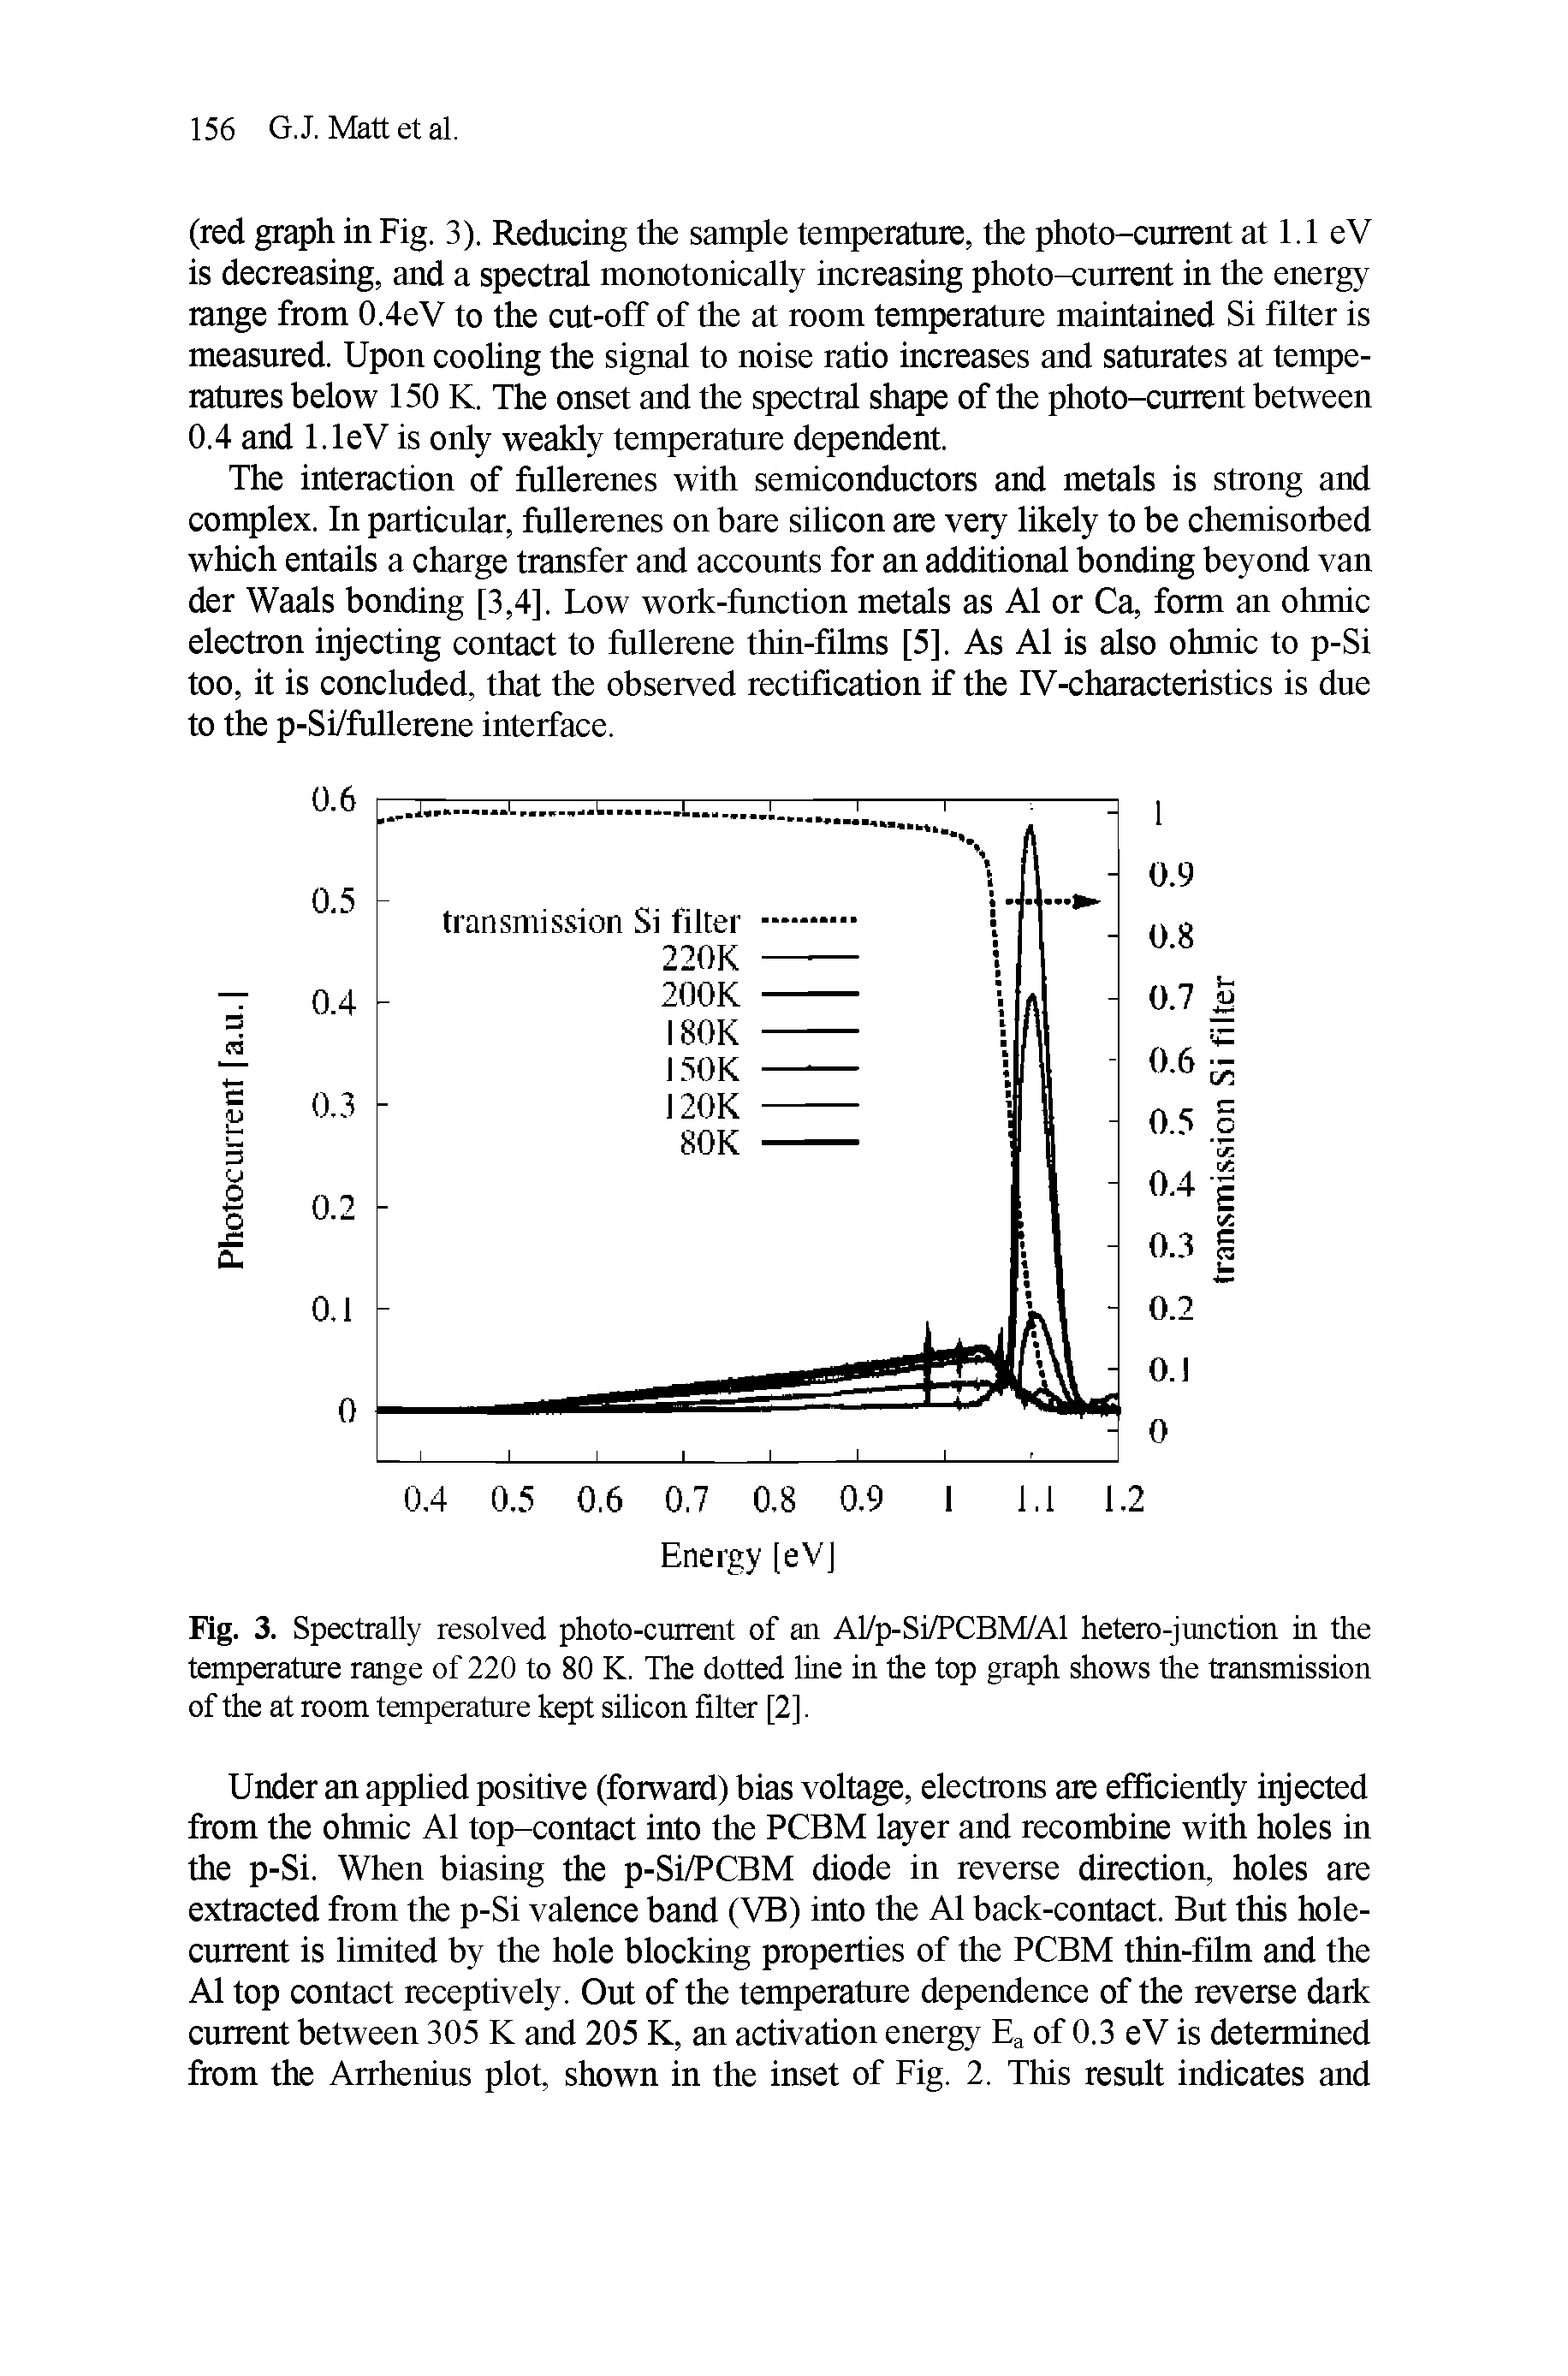 Fig. 3. Spectrally resolved photo-current of an Al/p-Si/PCBM/Al hetero-junction in the temperature range of 220 to 80 K. The dotted line in the top graph shows the transmission of the at room temperature kept silicon filter [2].